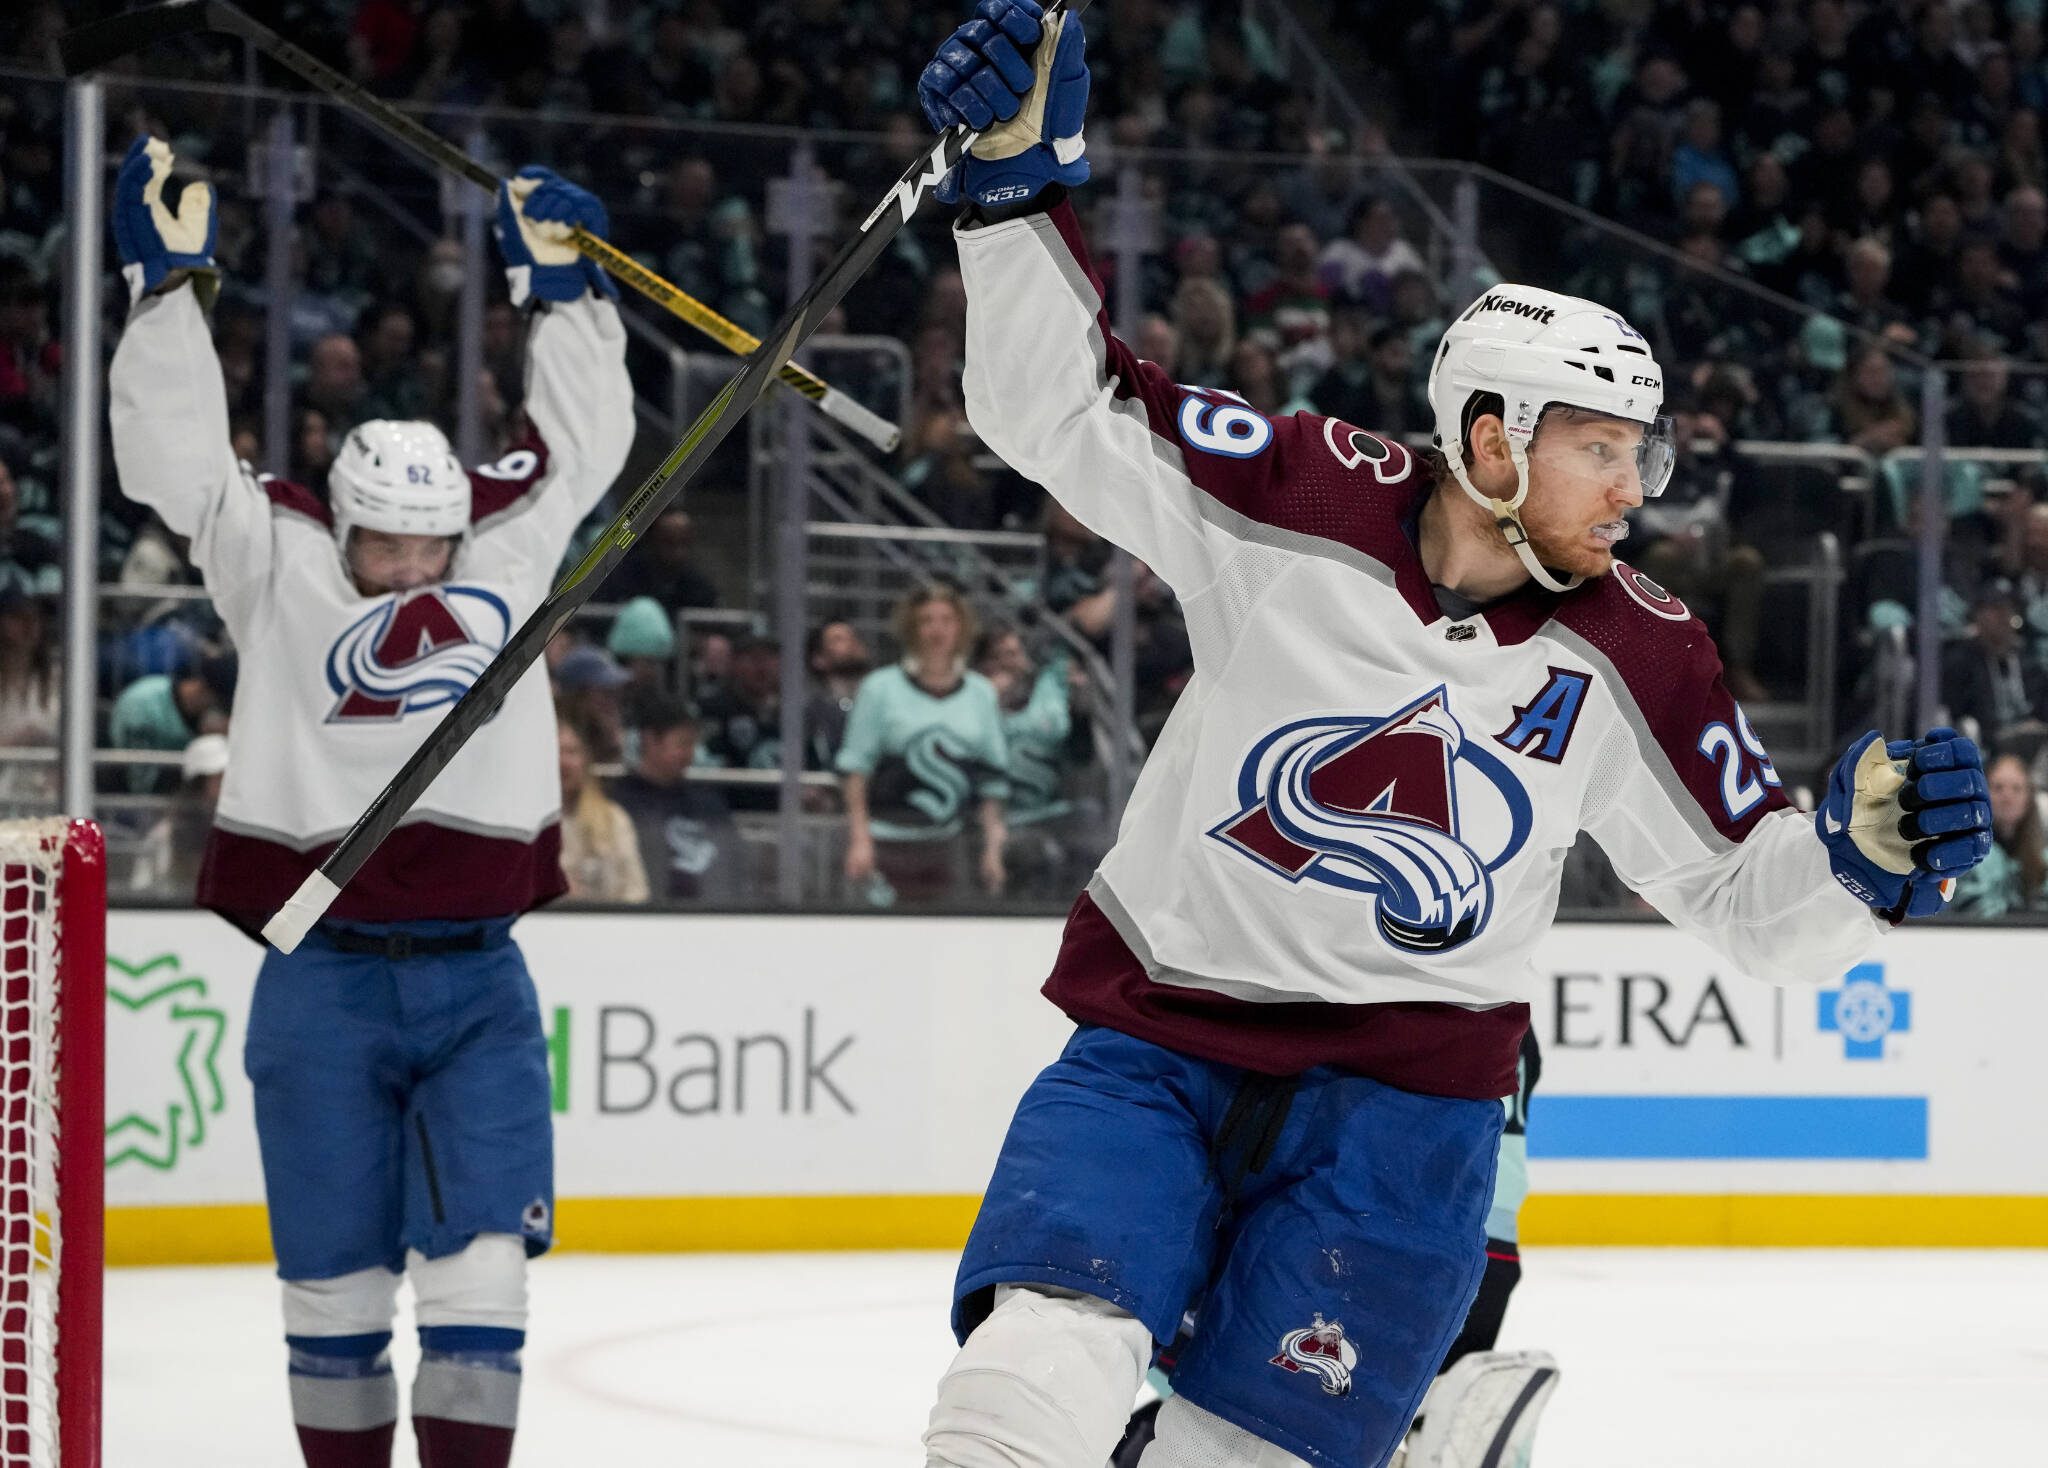 Avalanche defeat Flames for 5th straight win - The Rink Live